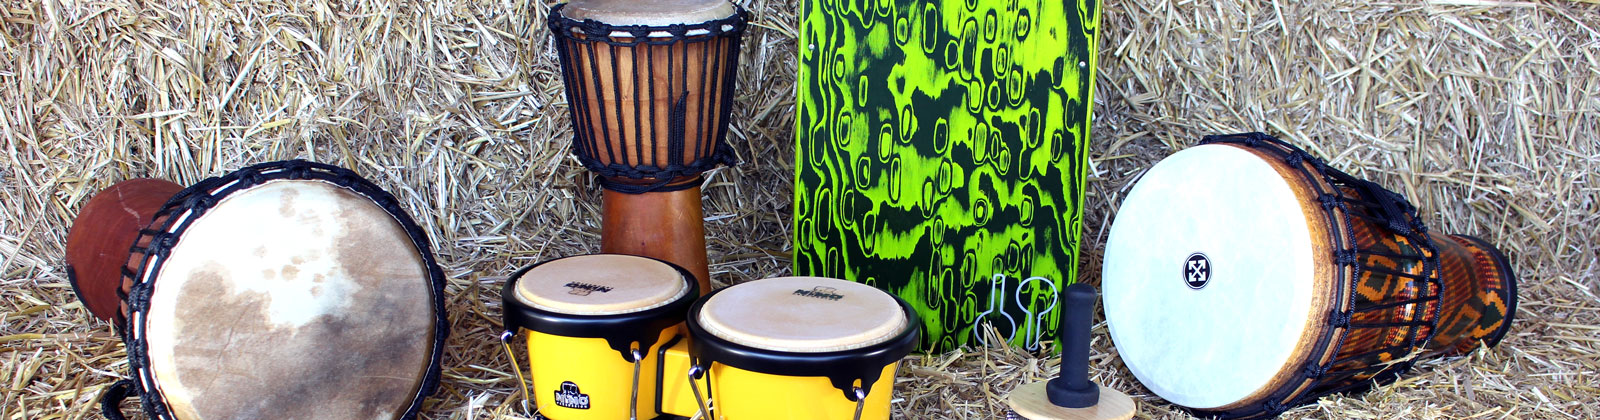 Drums - und Percussion